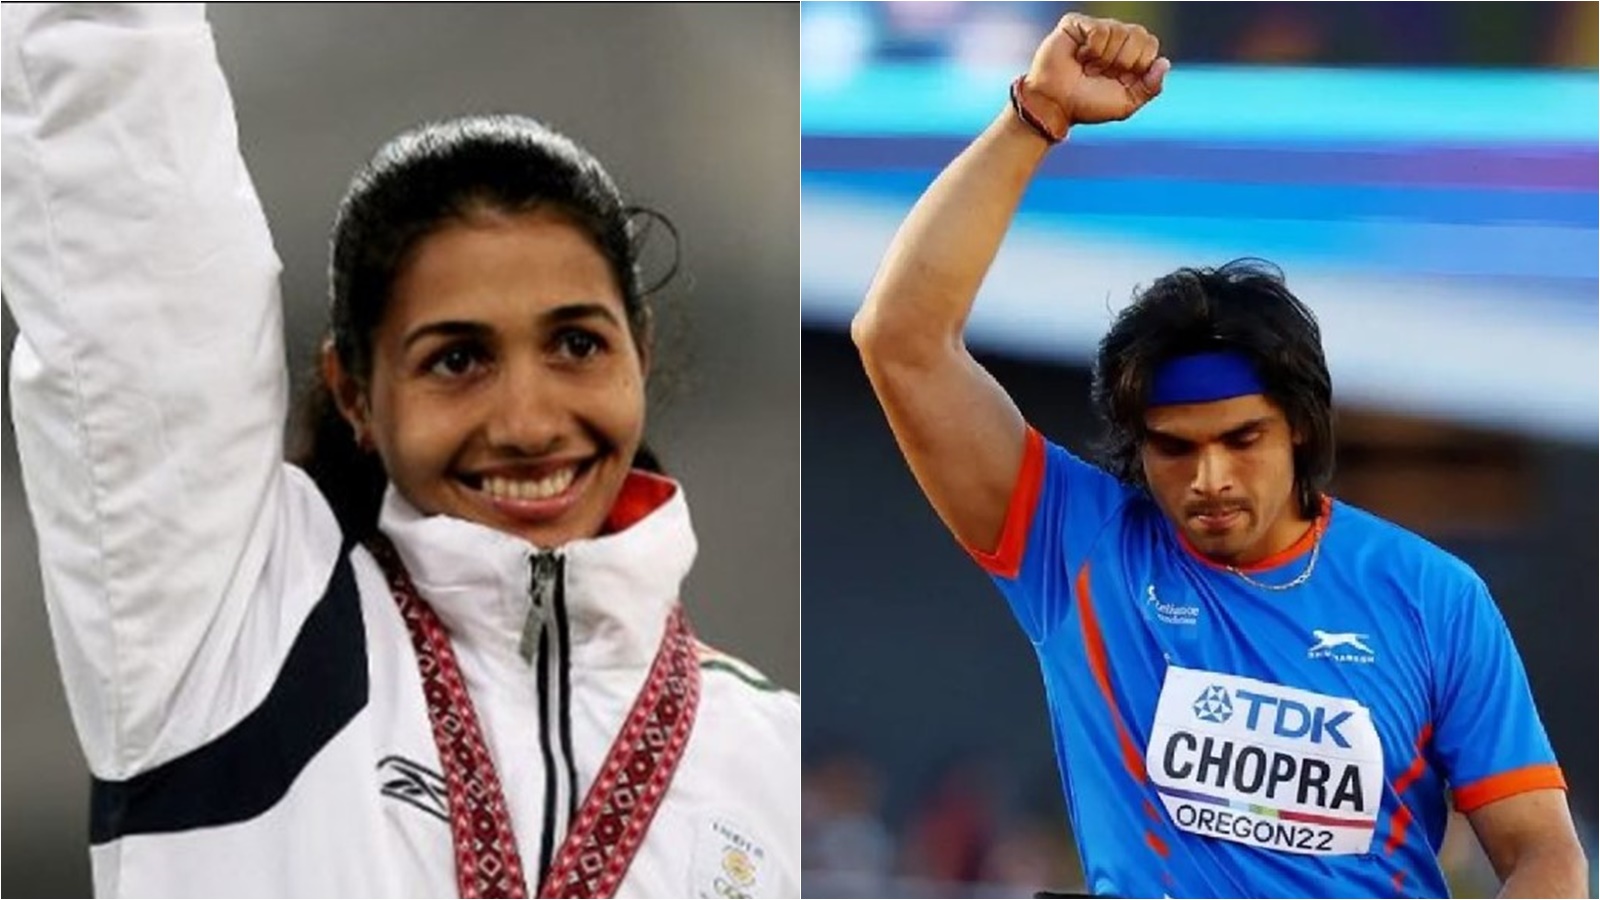 android, controversy in ioa as athletics legend anju bobby george questions move to ignore neeraj chopra as flagbearer for paris olympics